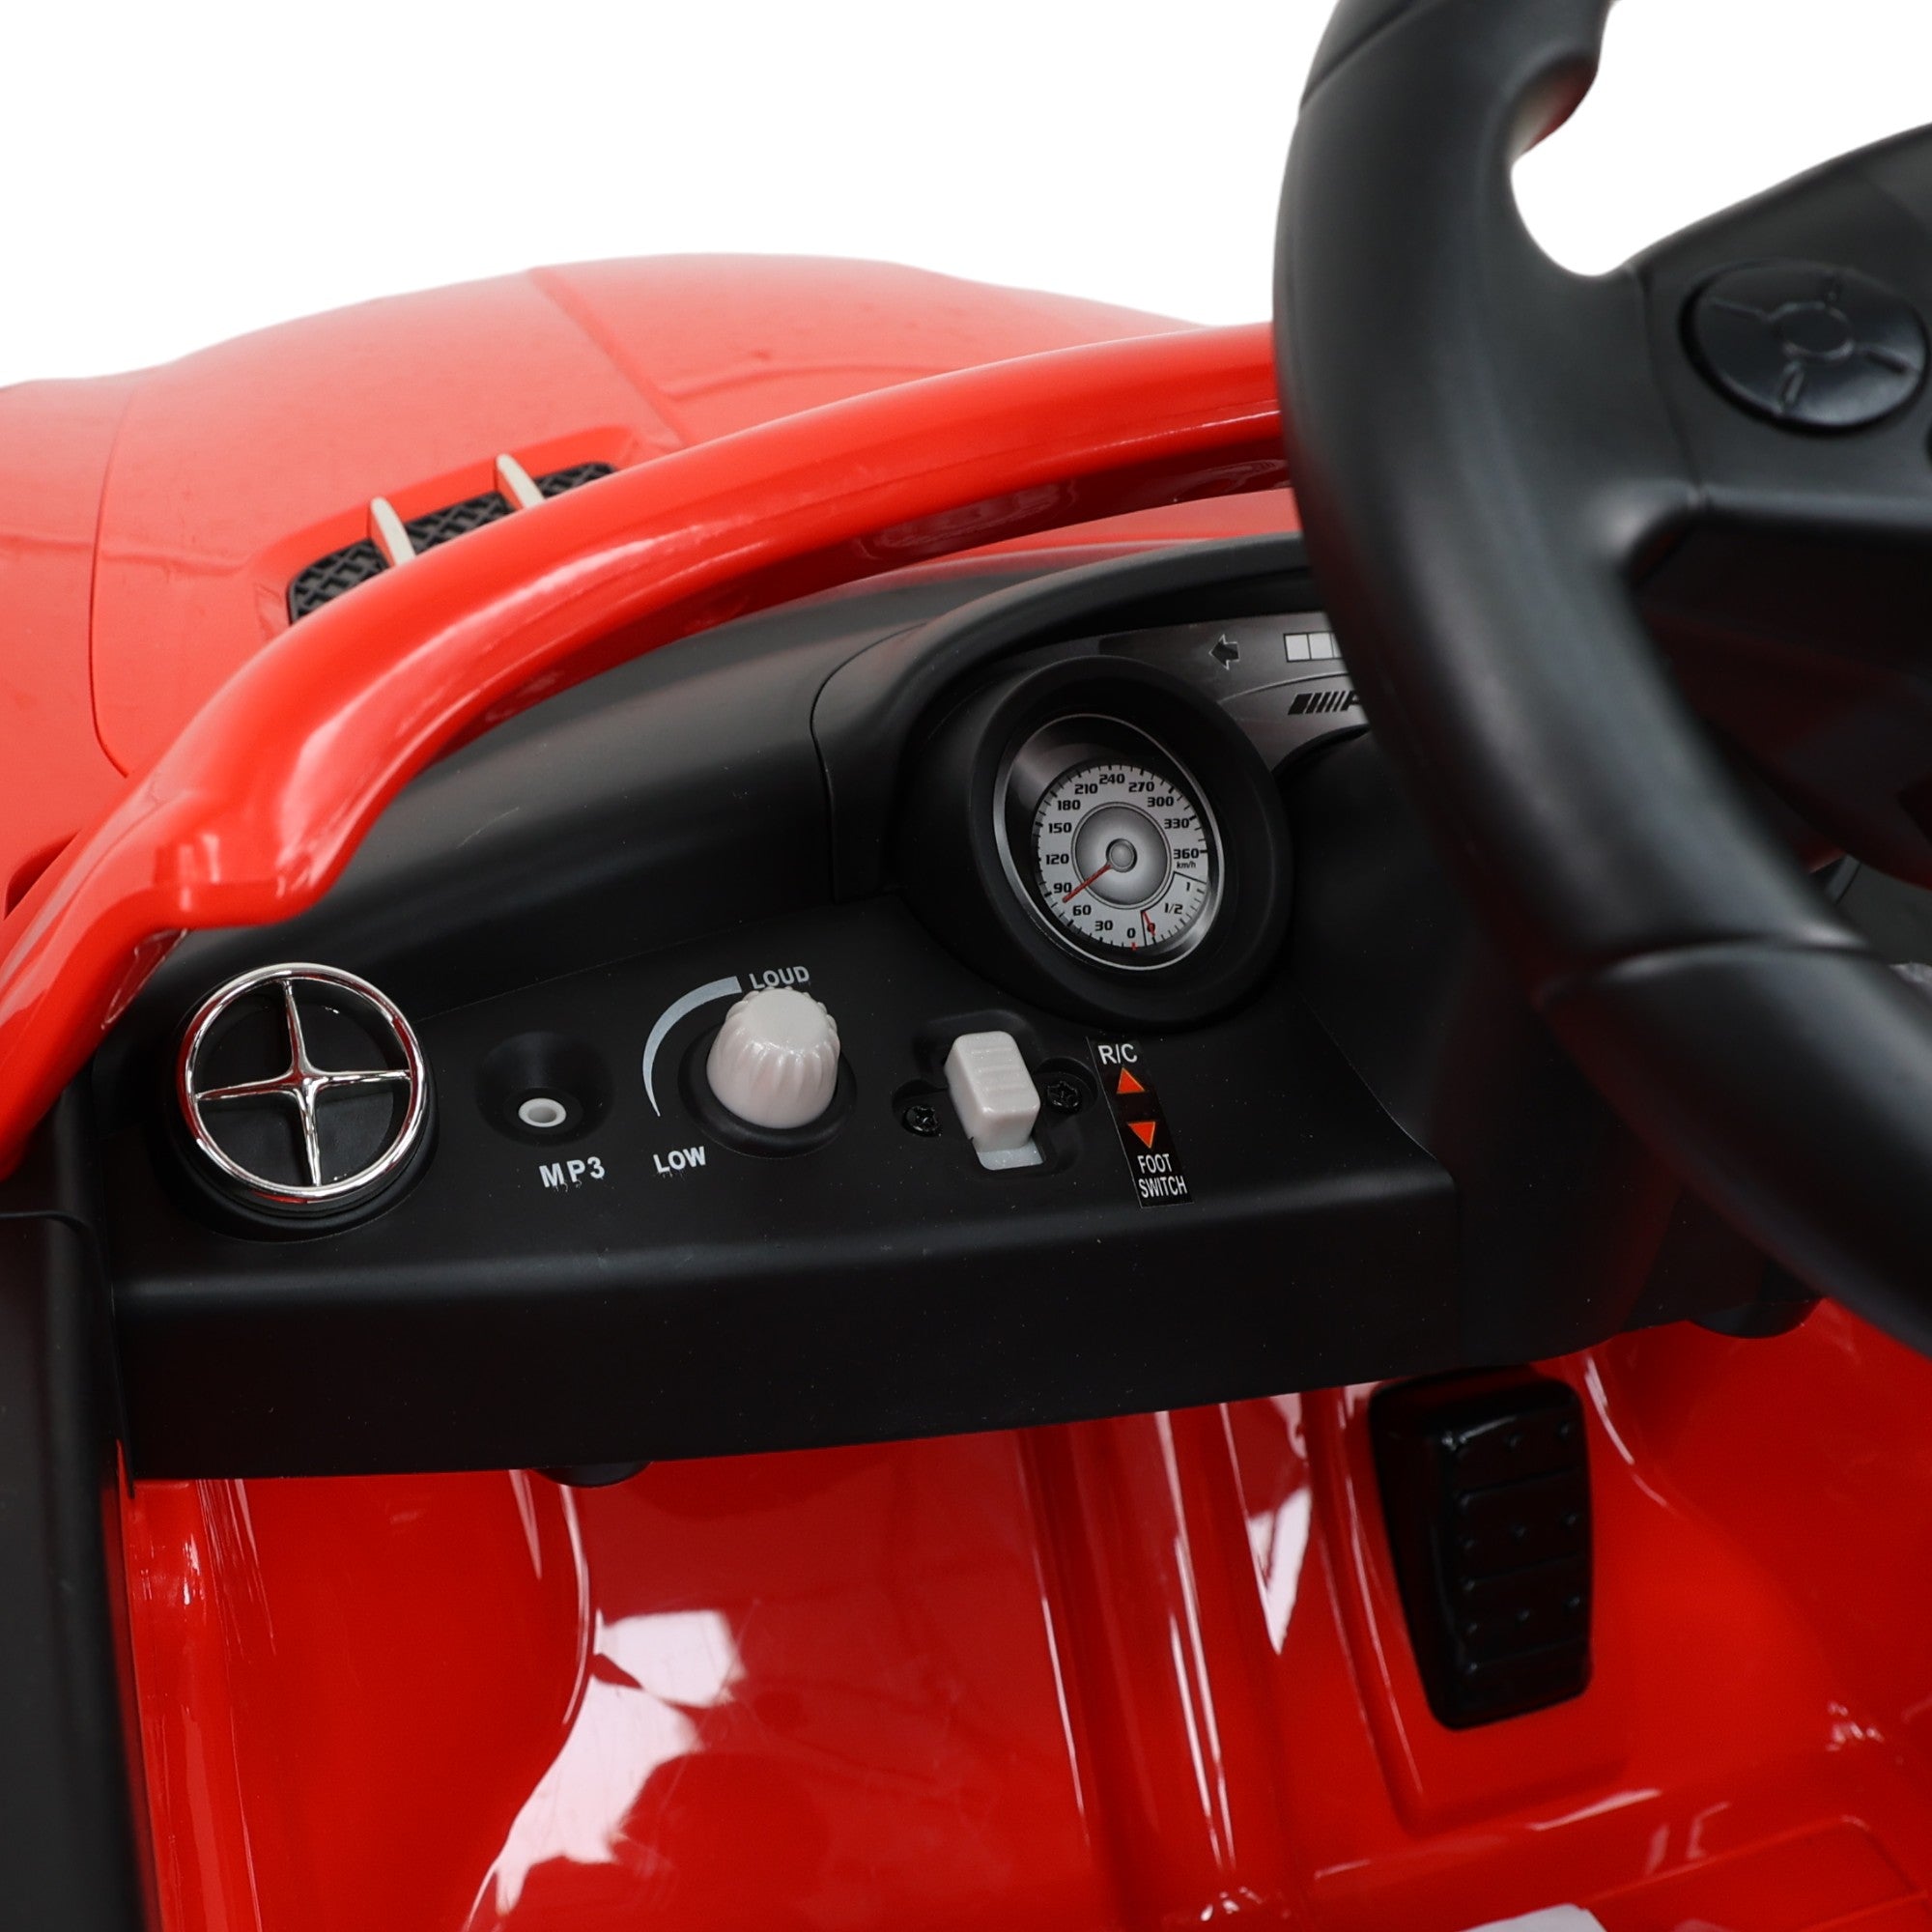 Child Barber Chairs - Mercedes Sport Car Red